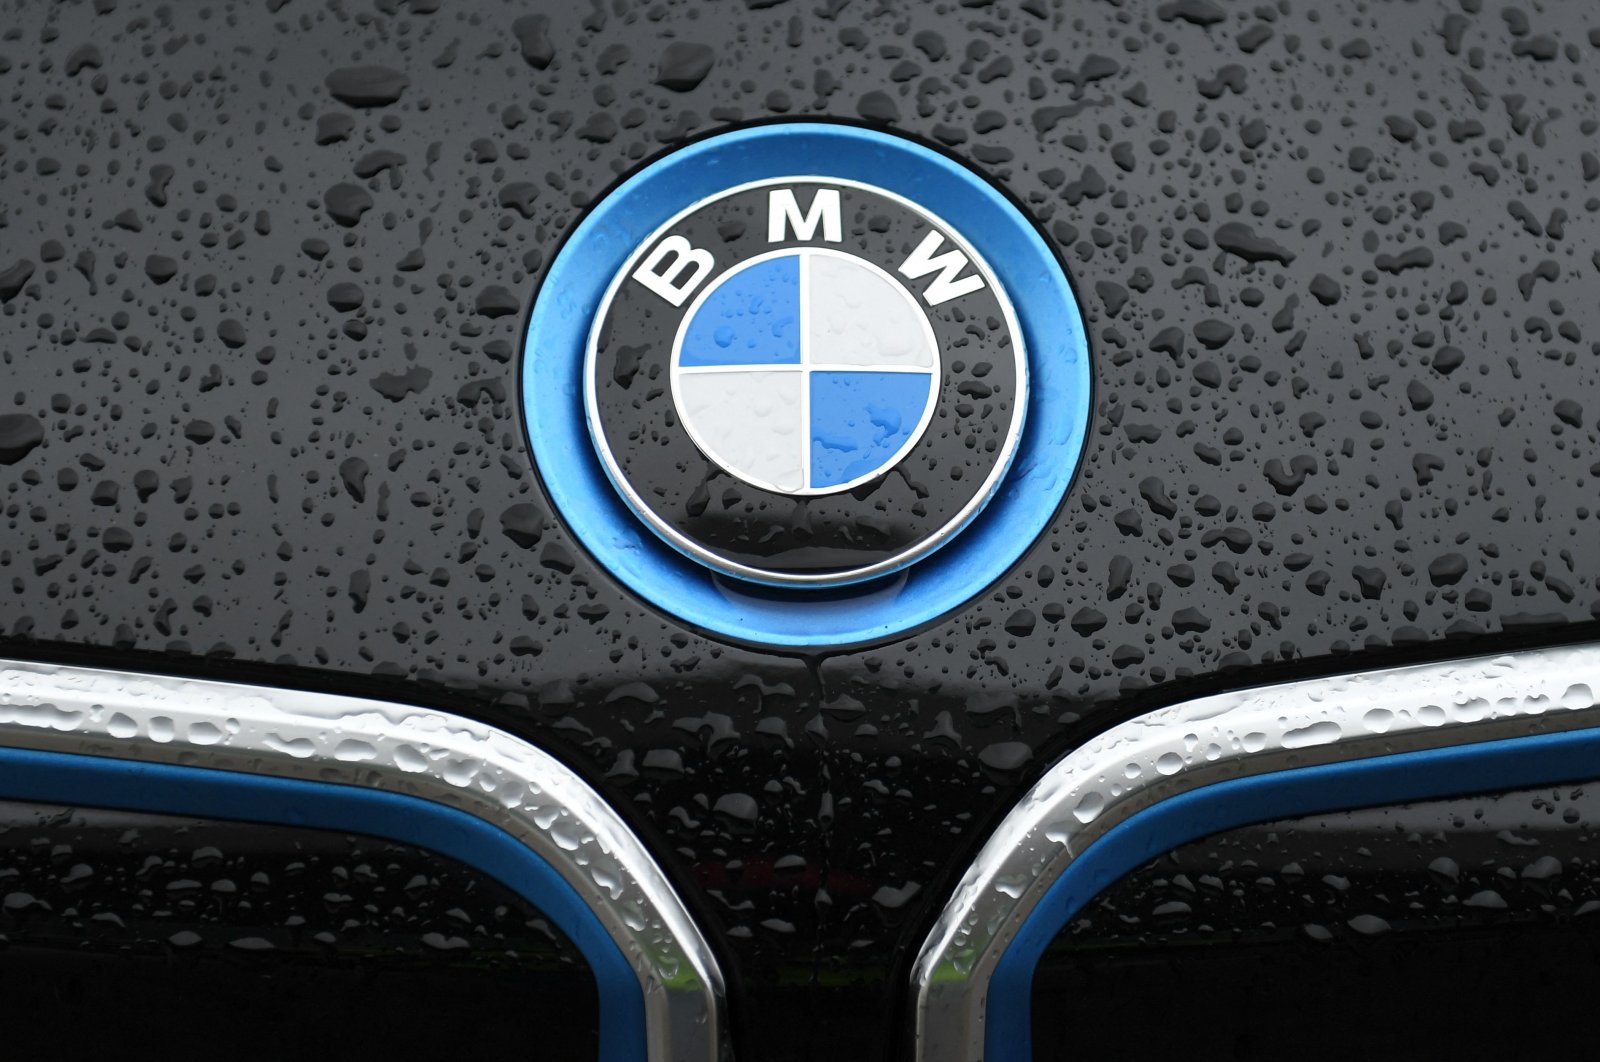 The logo of German carmaker BMW is pictured on a BMW car in Munich, southern Germany, March 15, 2021. (AFP Photo)